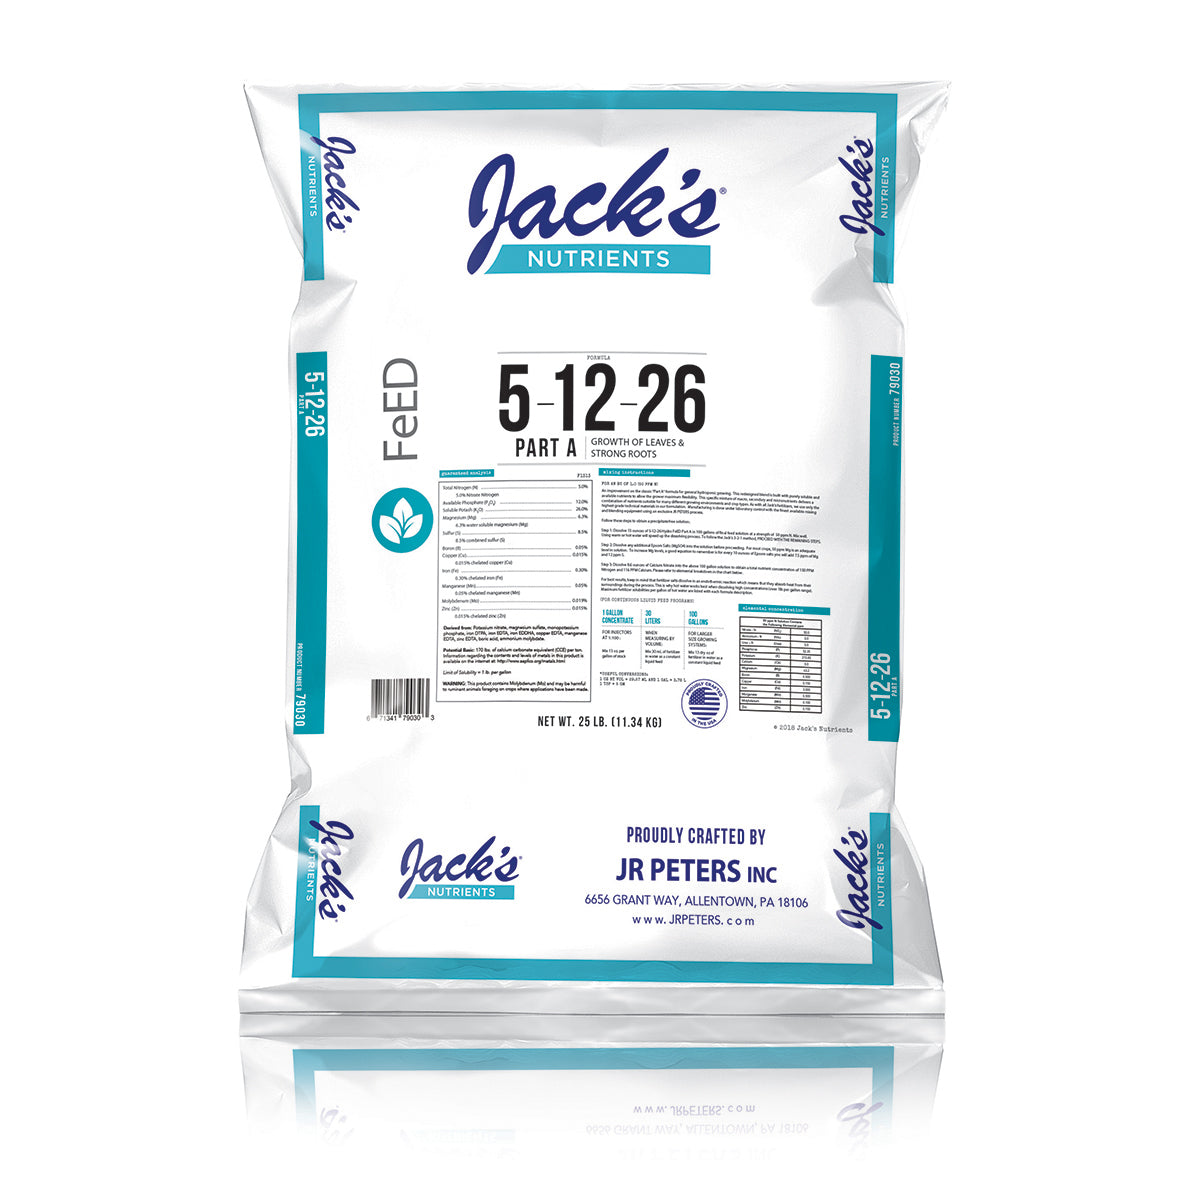 Product Secondary Image:Jack's Nutrients (5-12-26) Part A